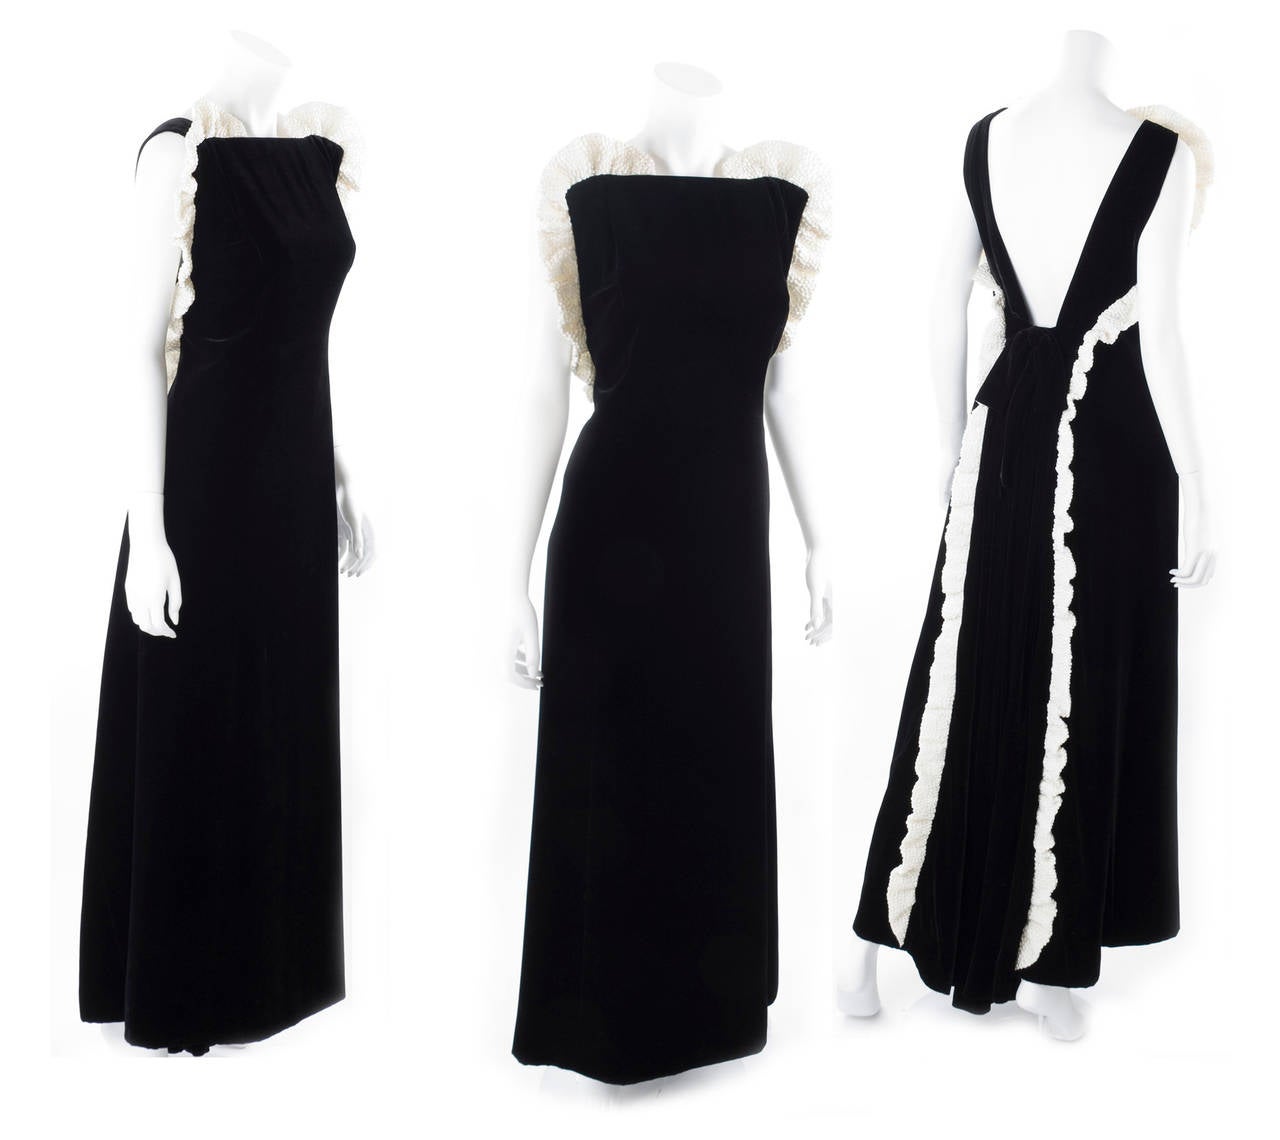 Vintage Jacqueline de Ribes Velvet Evening Gown.
Black viscose velvet and ivory silk trim.
Zip closure in the back and snap buttons for the bow detail.
Size: US 10
Excellent condition.
Measurements:
Length 141 cm - 55.5 inches - Waist 80 cm -